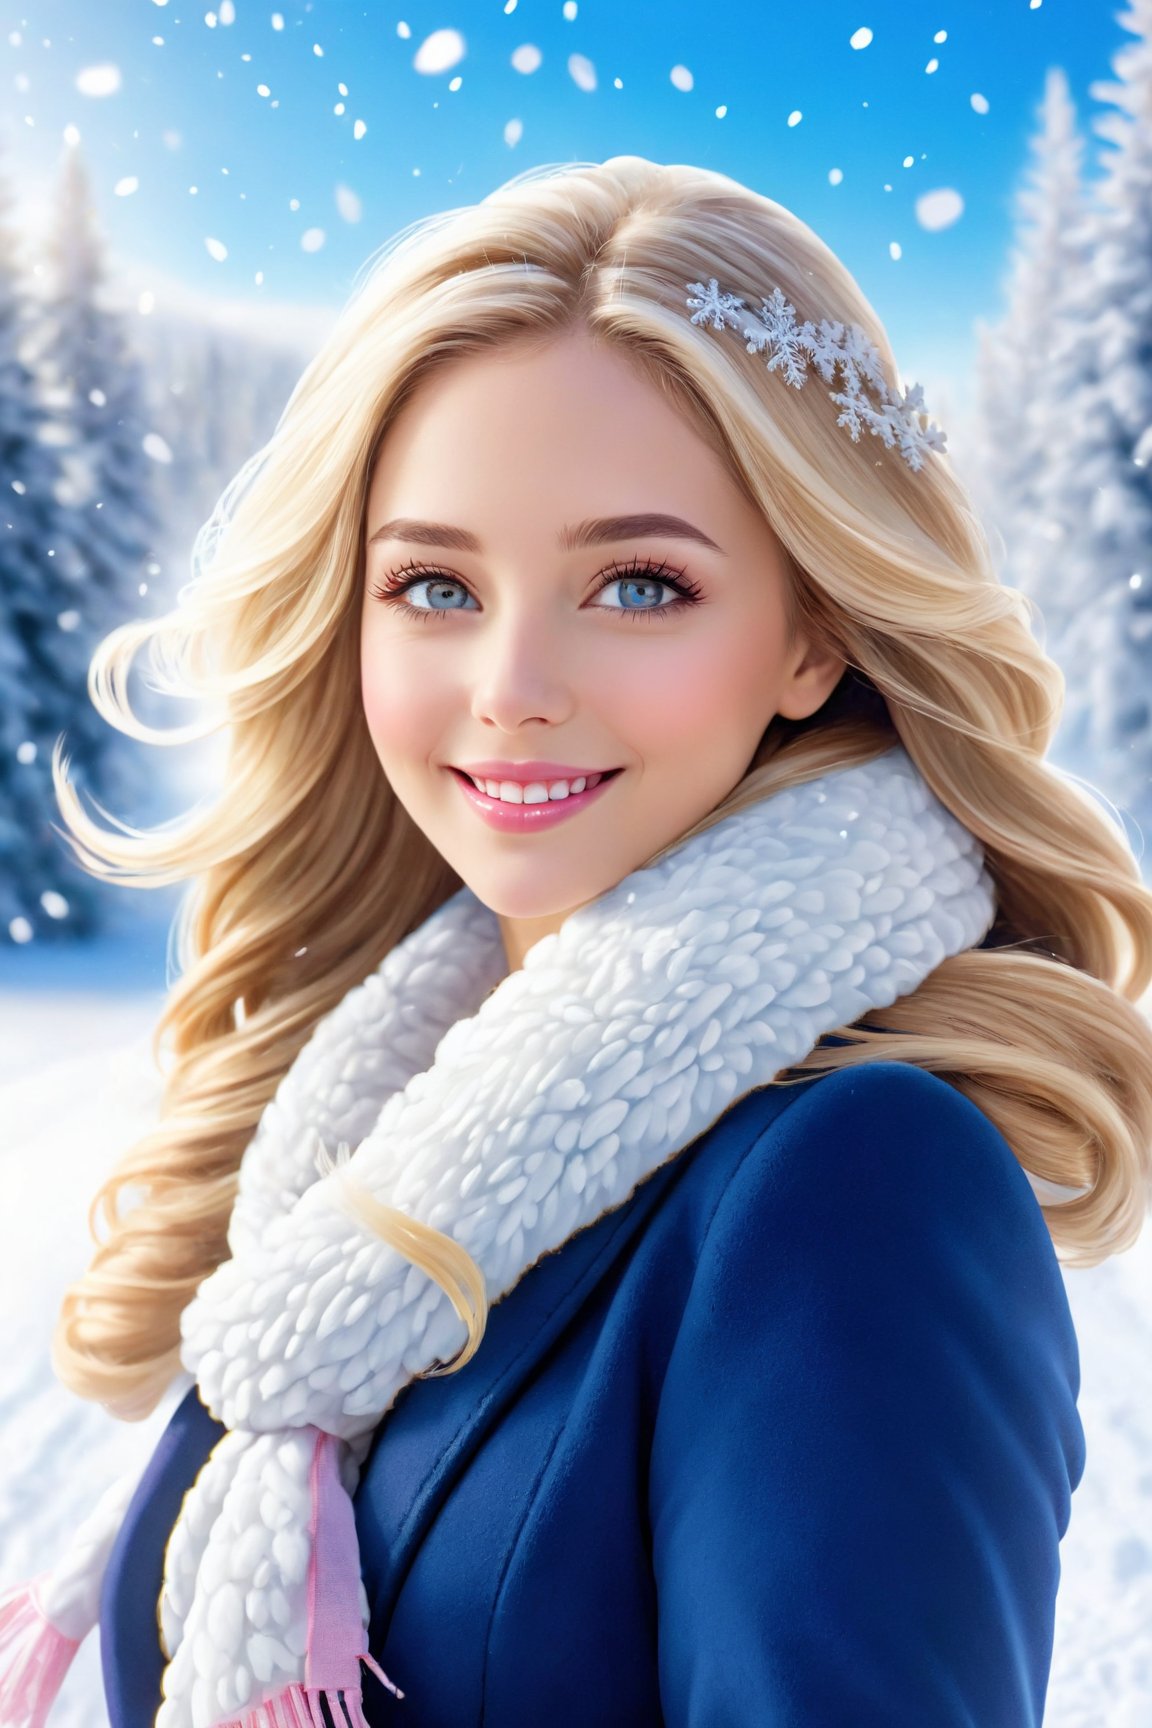 (best quality,  4k,  8k,  highres,  masterpiece:1.2),  ultra-detailed,  (realistic,  photorealistic,  photo-realistic:1.37),  portrait,  beautiful and smiling caucasian woman,  cinematic,  winter clothes,  Ondas e Nuances,  detailed symmetric hazel eyes,  circular iris,  vivid colors,  winter scenery,  soft snowflakes falling,  icy breath,  rosy cheeks,  pure white background,  subtle warm lighting,  innocence and radiance,  sparkling eyes,  joyful expression,  luxurious fur trim on the clothing,  frosty winter air,  subtle wind blowing through her hair,  subtle hint of pink in her lips,  elegant posture,  confident stance,  delicate snowflakes decorating her hair,  long flowing blonde hair,  wonder and serenity in her gaze,  captivating beauty,  snow-covered trees in the background,  peaceful and enchanting winter scene.